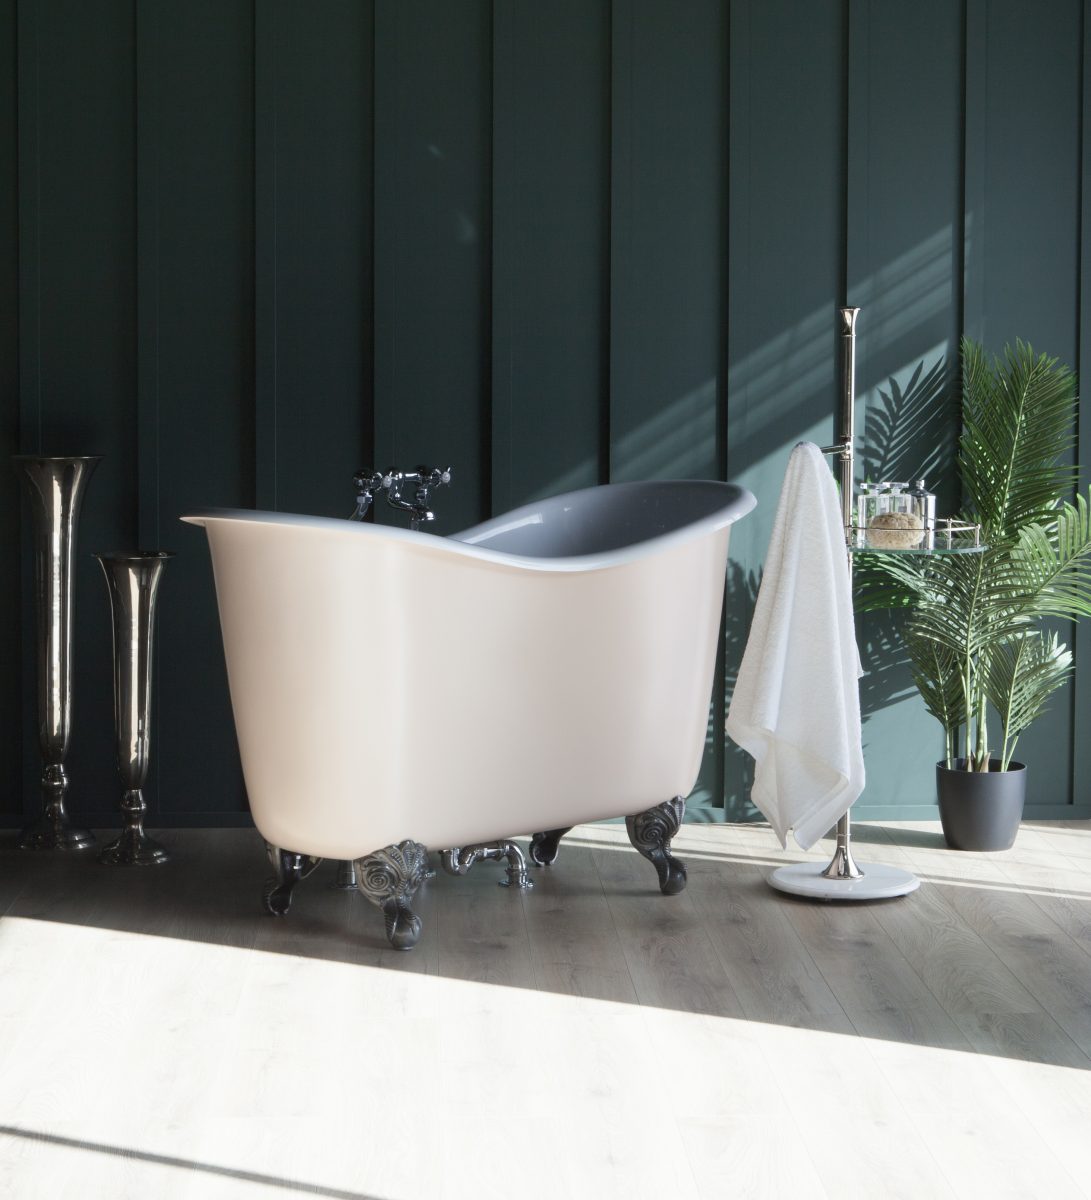 Tubby Too double ended bath slightly angled front on view. Bath shown with painted exterior and burnished Iron feet.